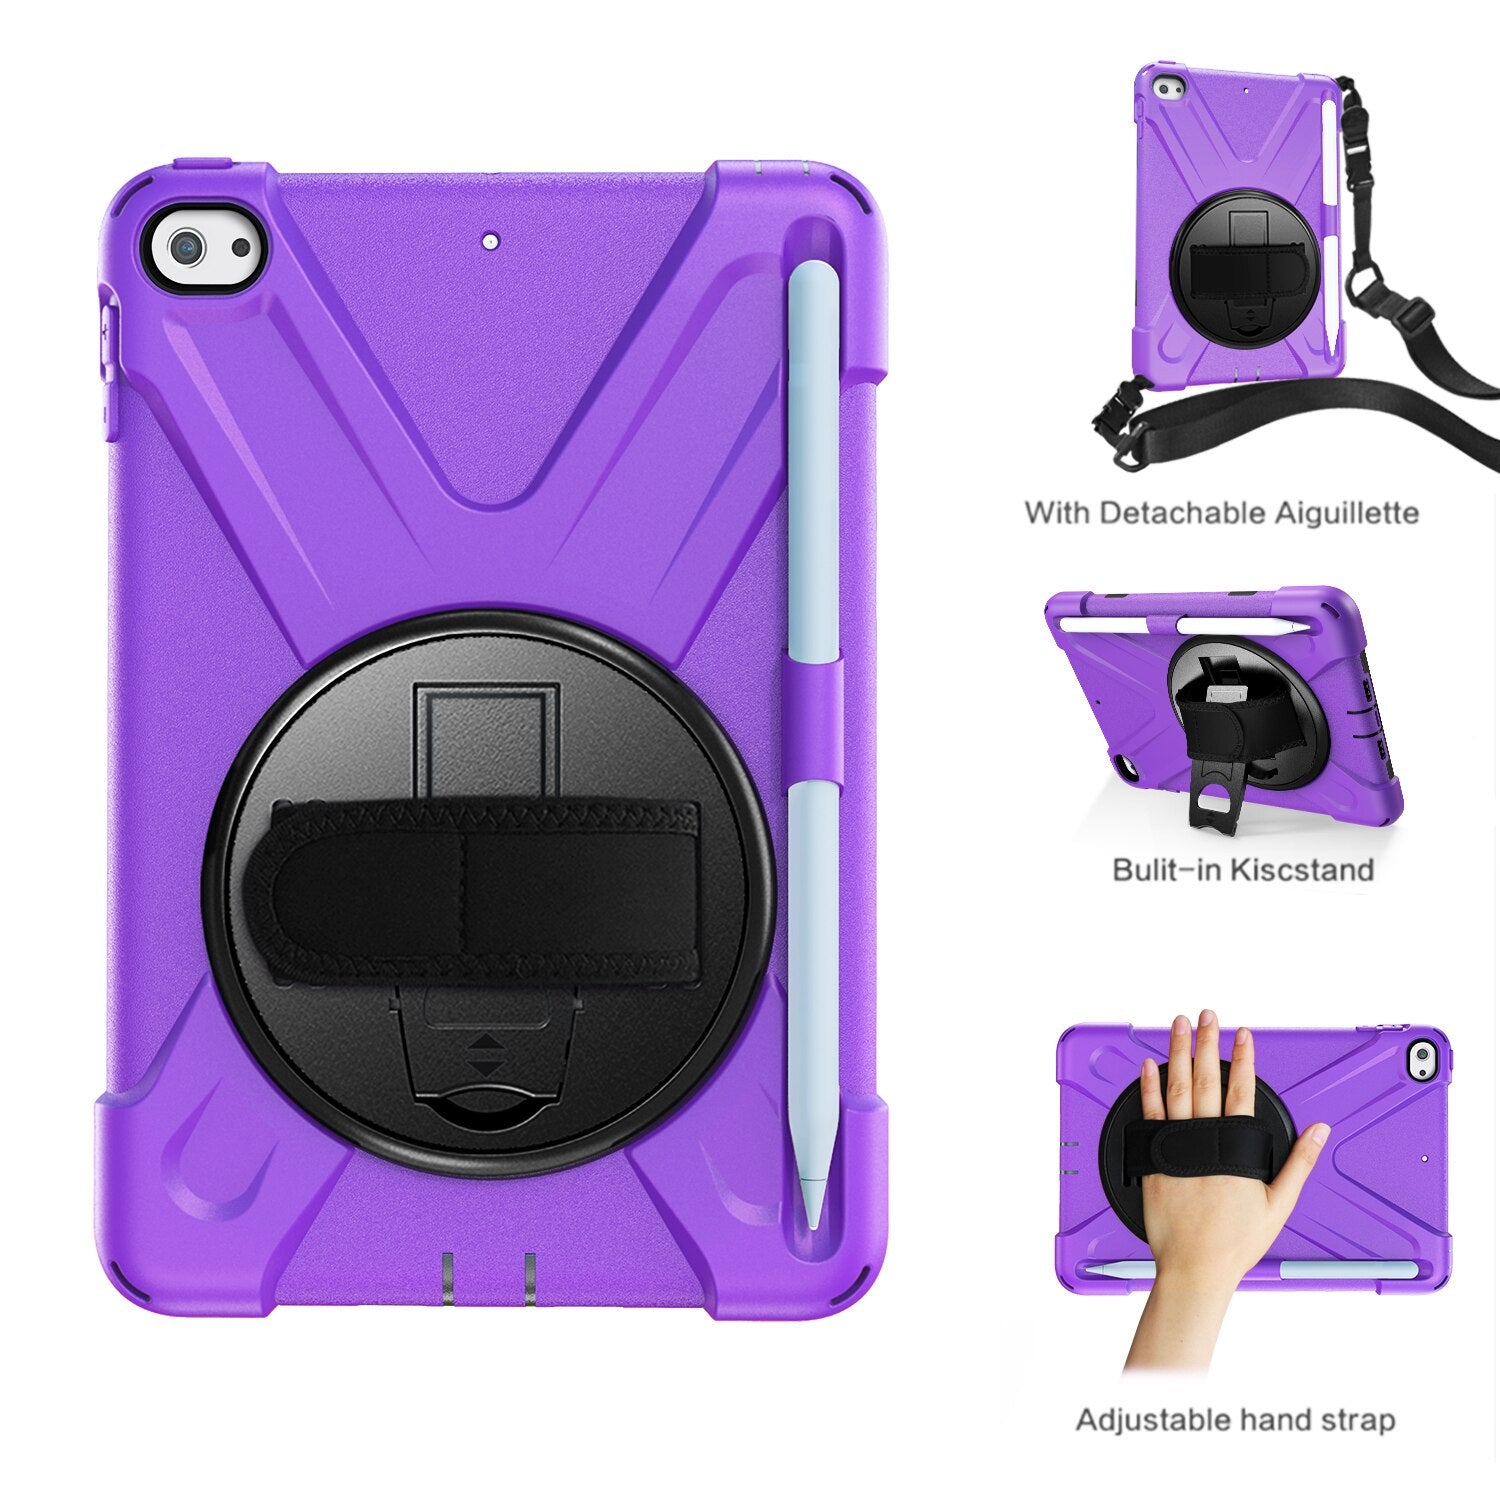 For iPad Mini 4 5 7.9" Case Silicone Shockproof Full Protective Case For iPad Mini 3 2 1 with Pencil Holder 5th Generation Case - 200001091 Purple / United States / For iPad Mini 1 2 3 Find Epic Store